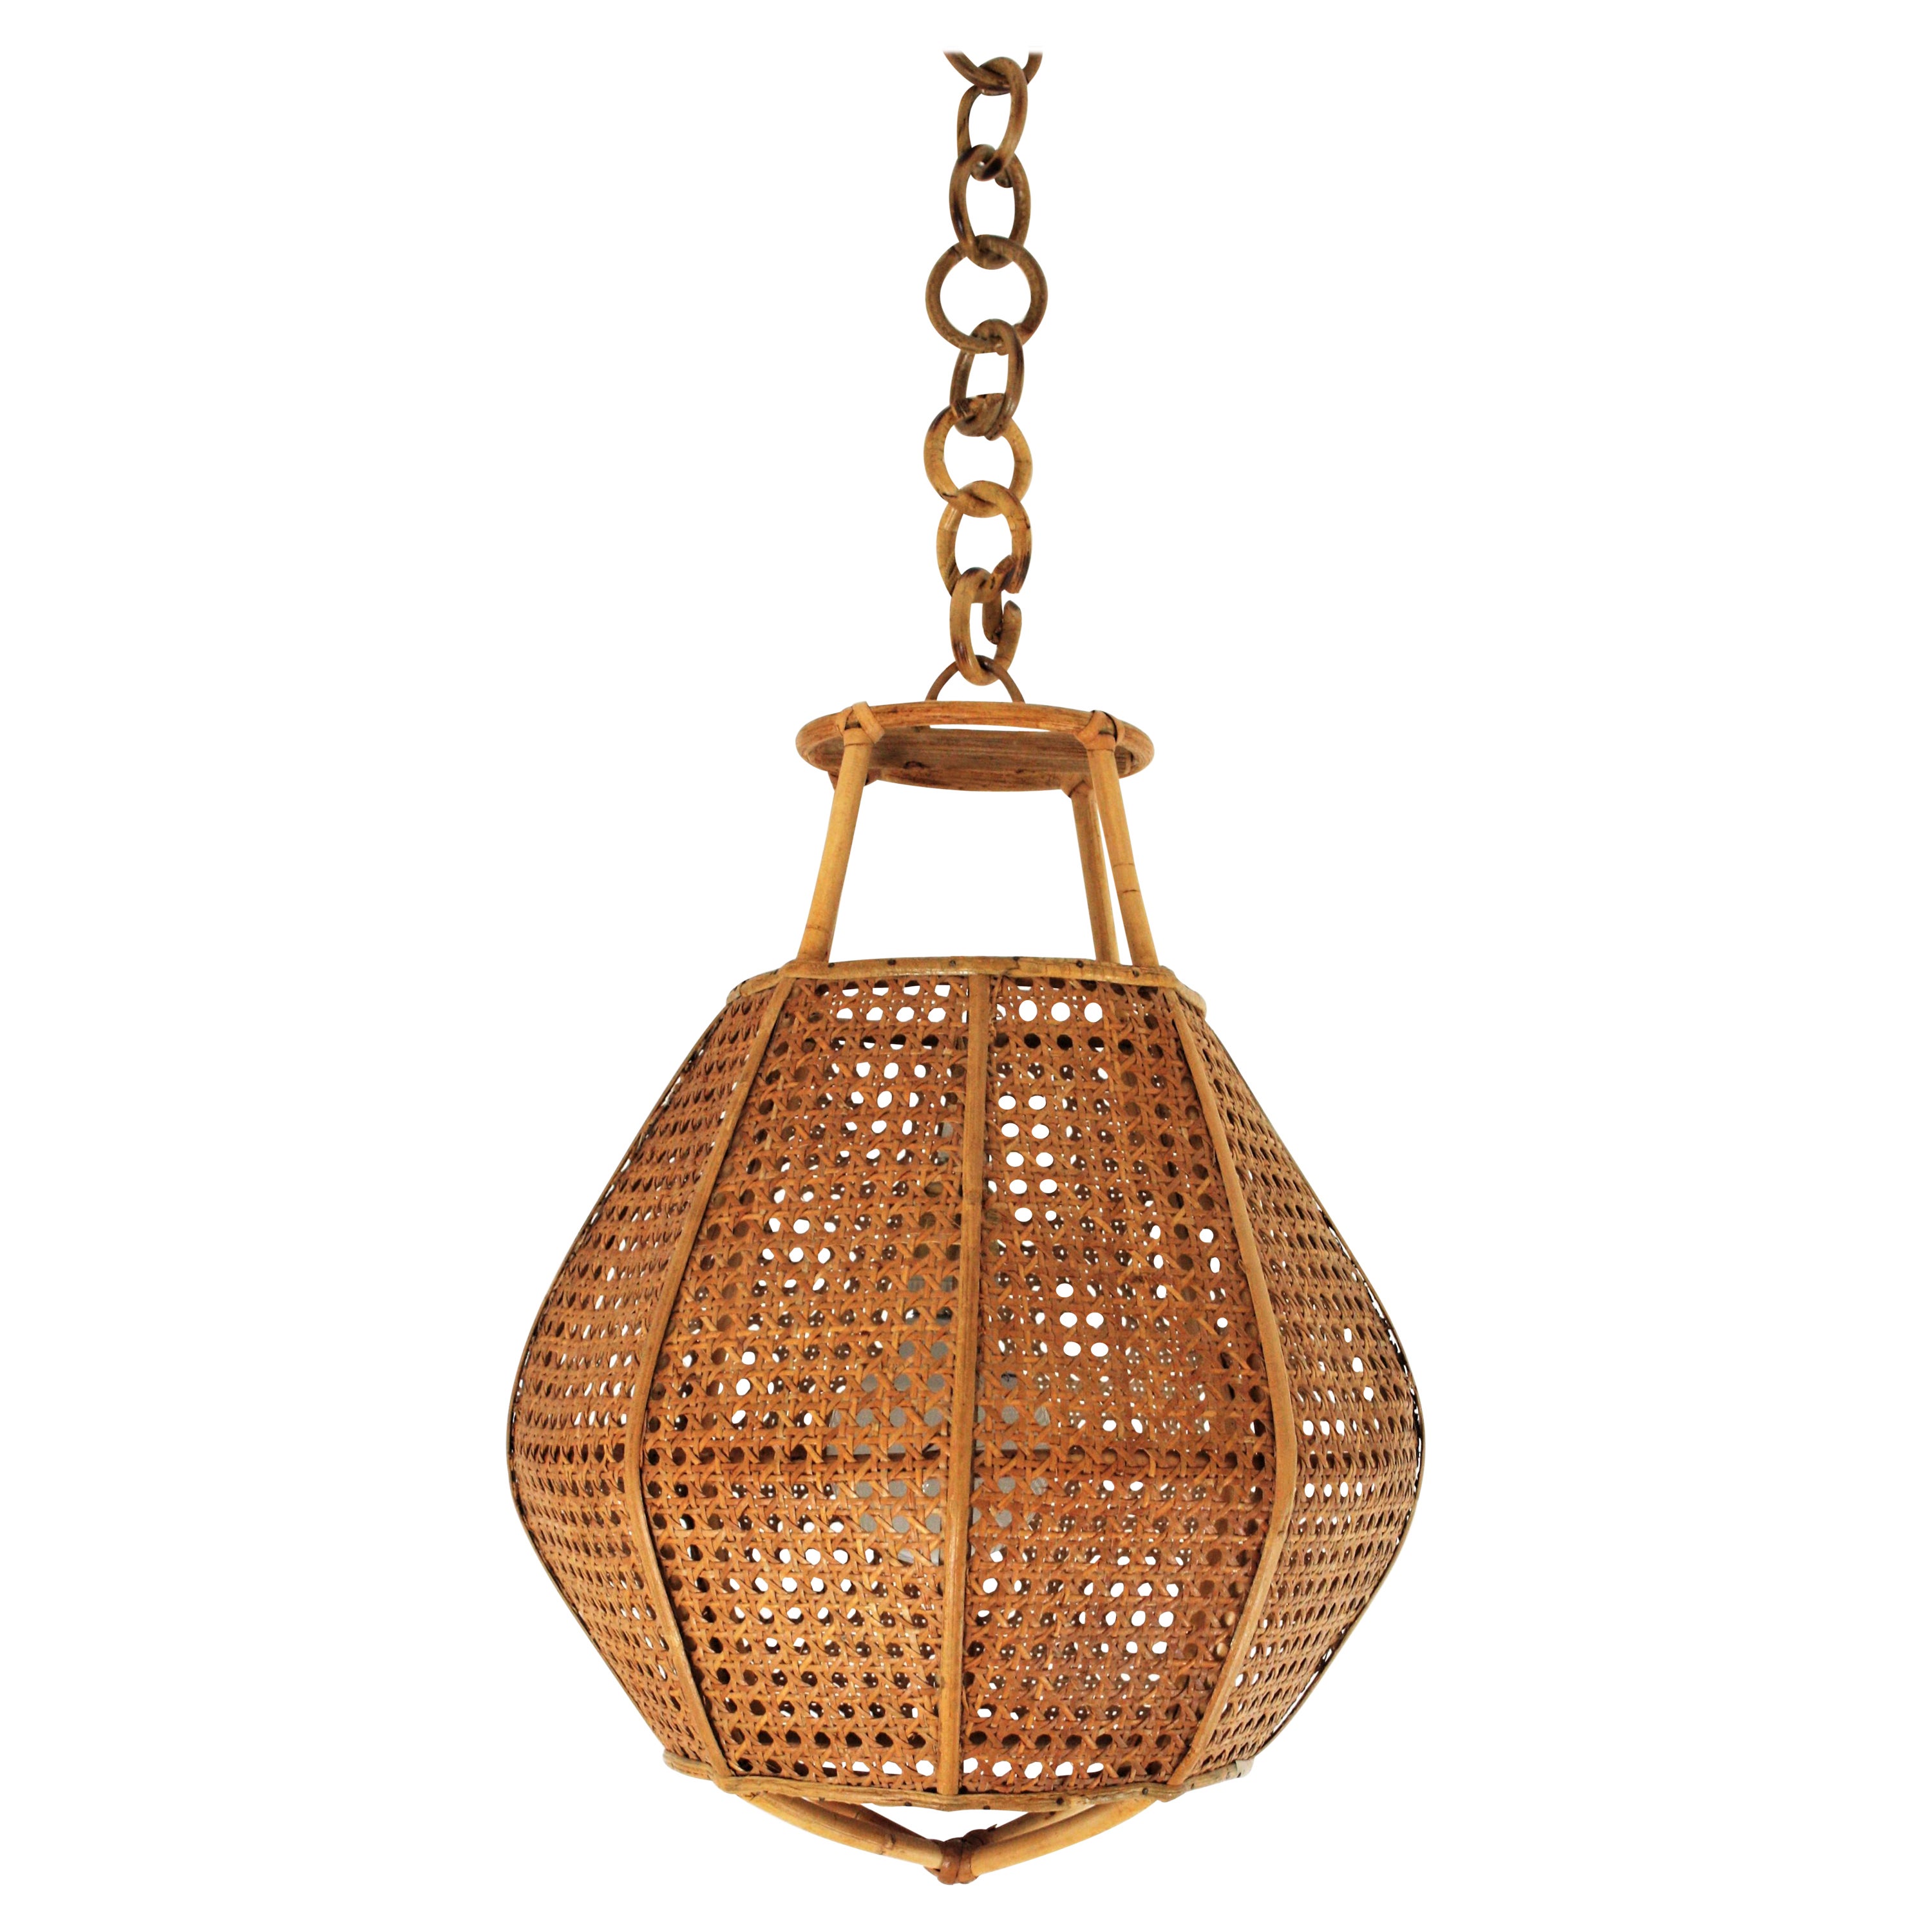 Italian Modernist Wicker Wire and Rattan Globe Pendant or Hanging Light, 1950s